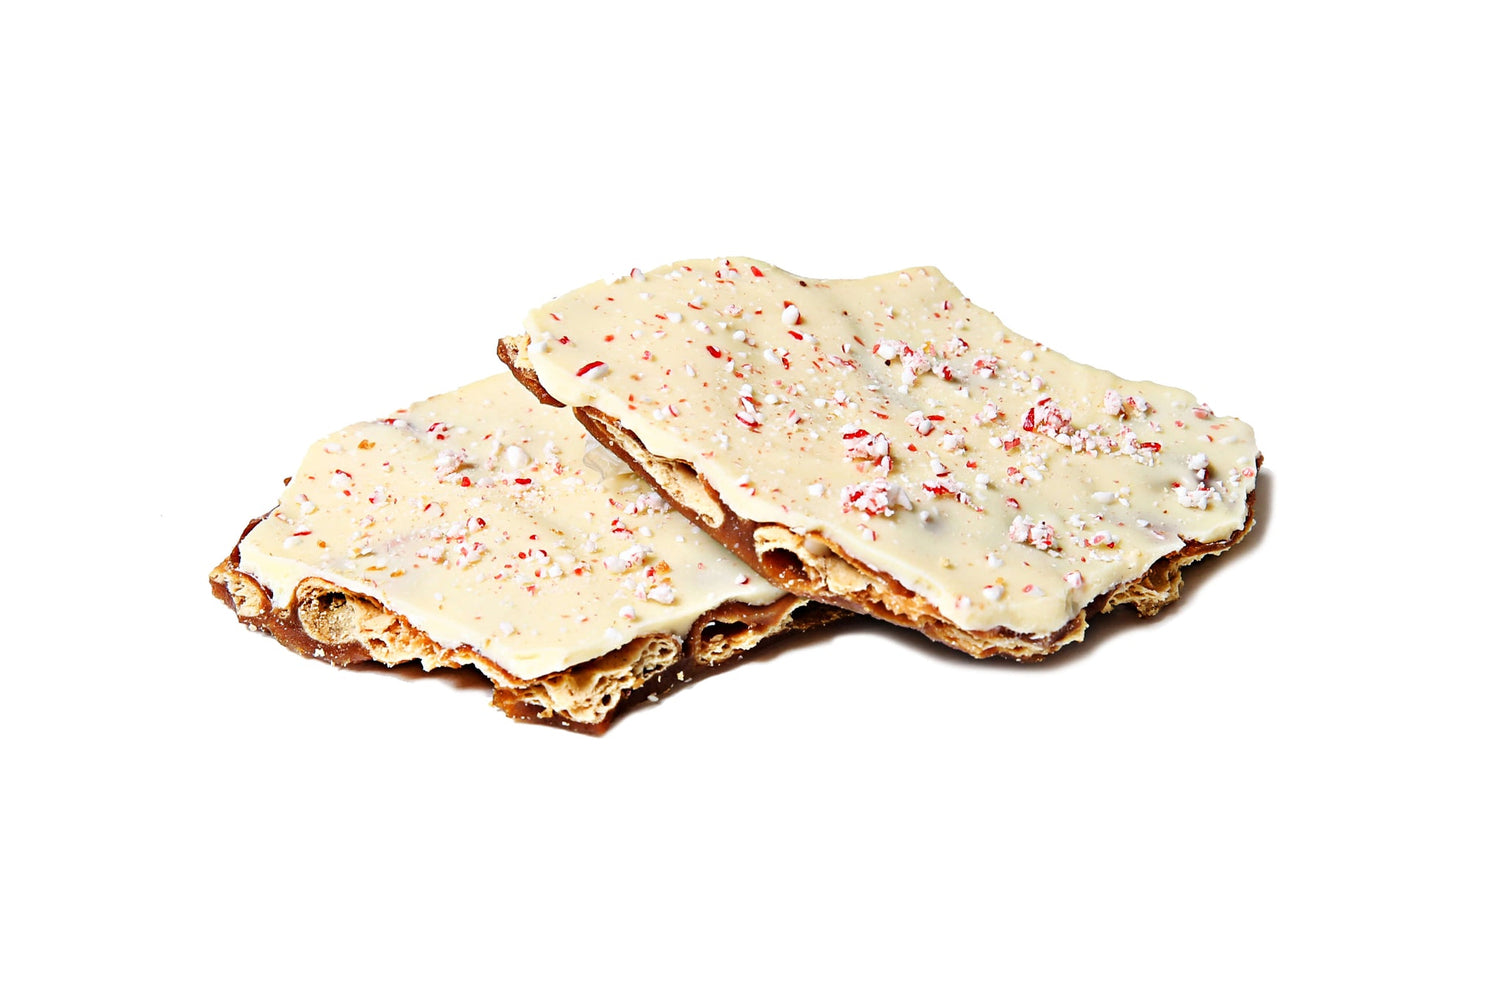 Christy's Gourmet - White Chocolate Peppermint Crunch 180g